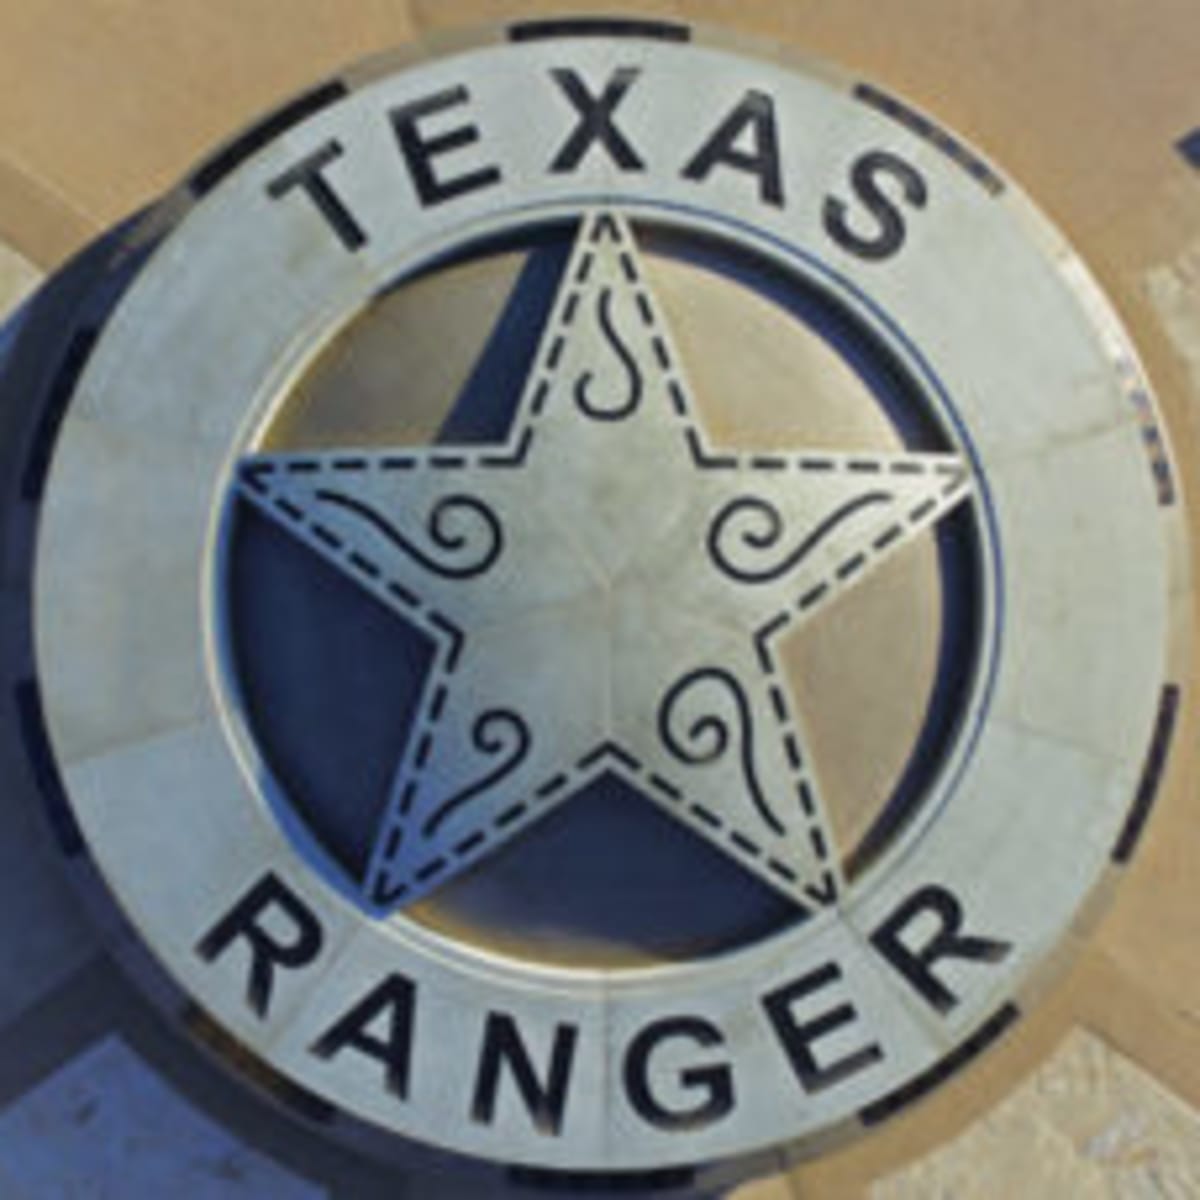 Collectors swoon over Texas Ranger items - Antique Trader